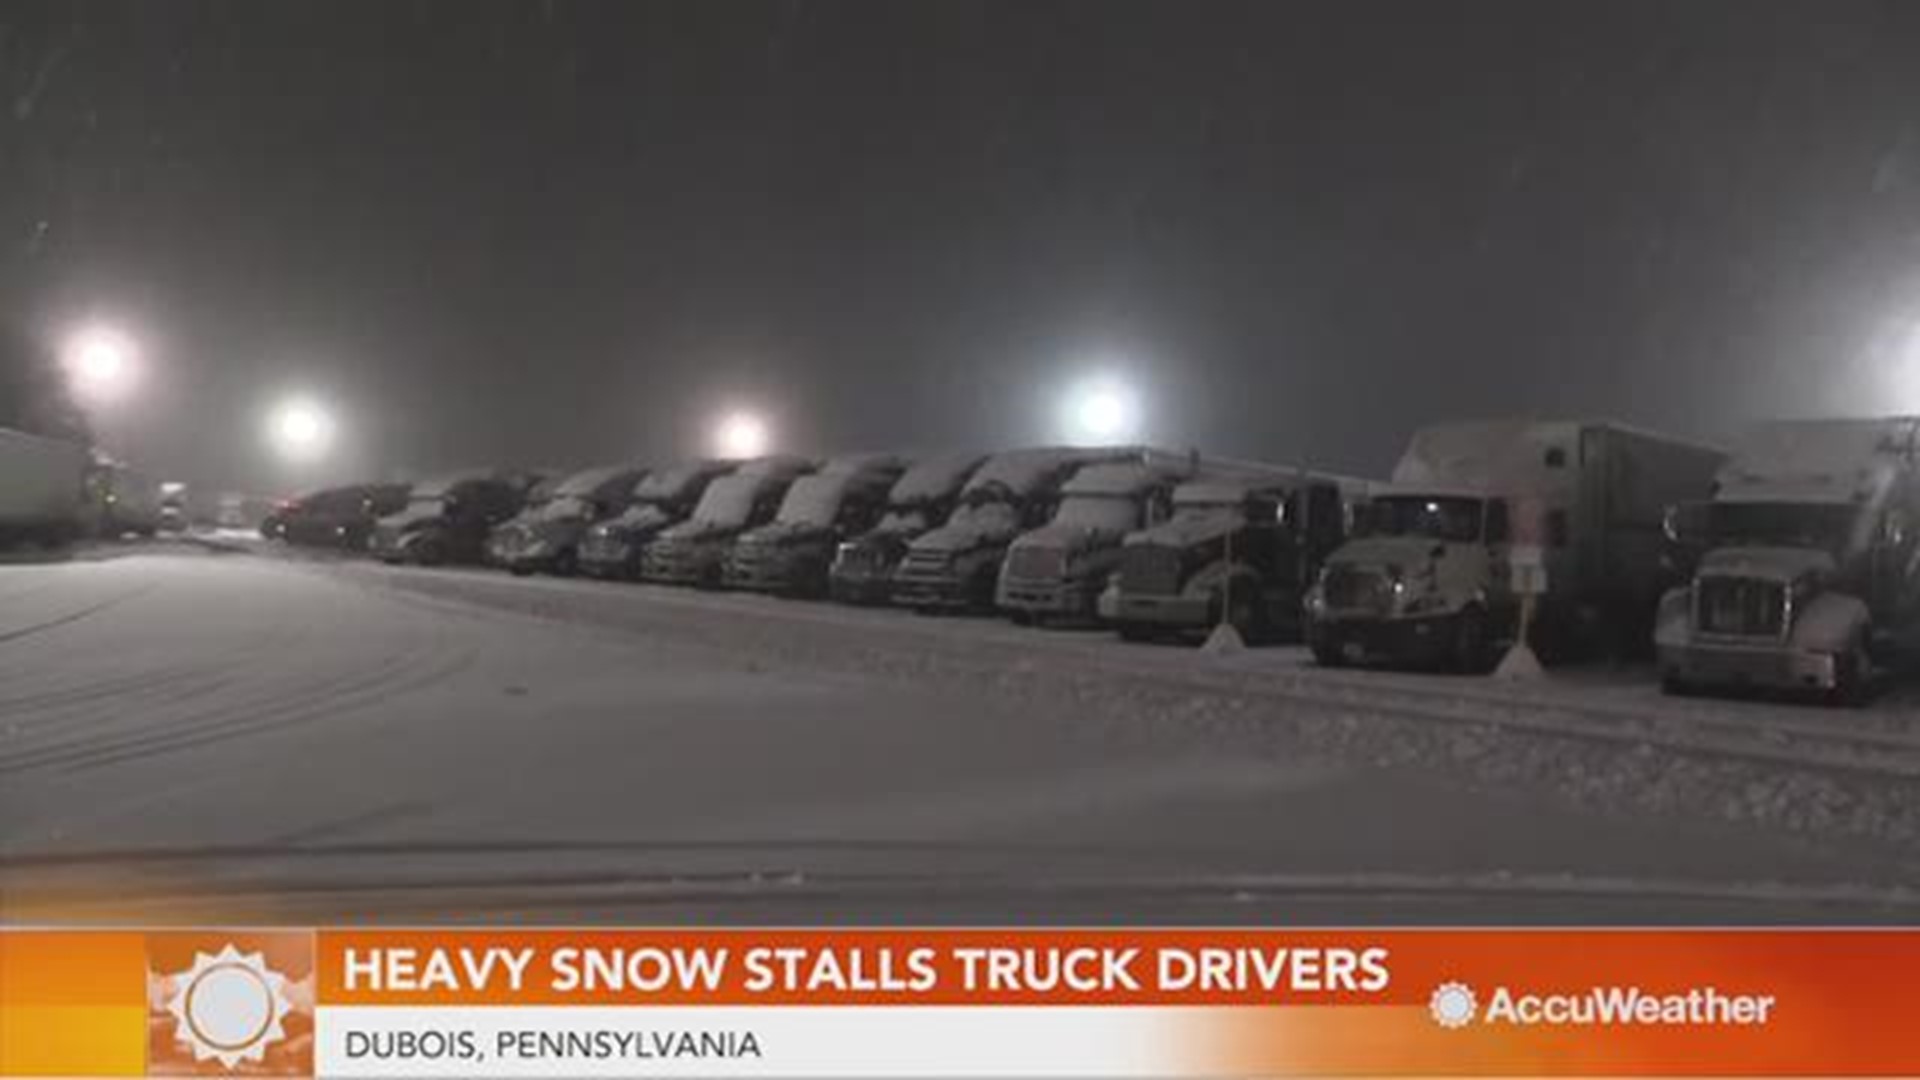 Road conditions were so bad from the major winter storm that truck drivers in DuBois, Pennsylvania were ordered to stay off the roads and find shelter.